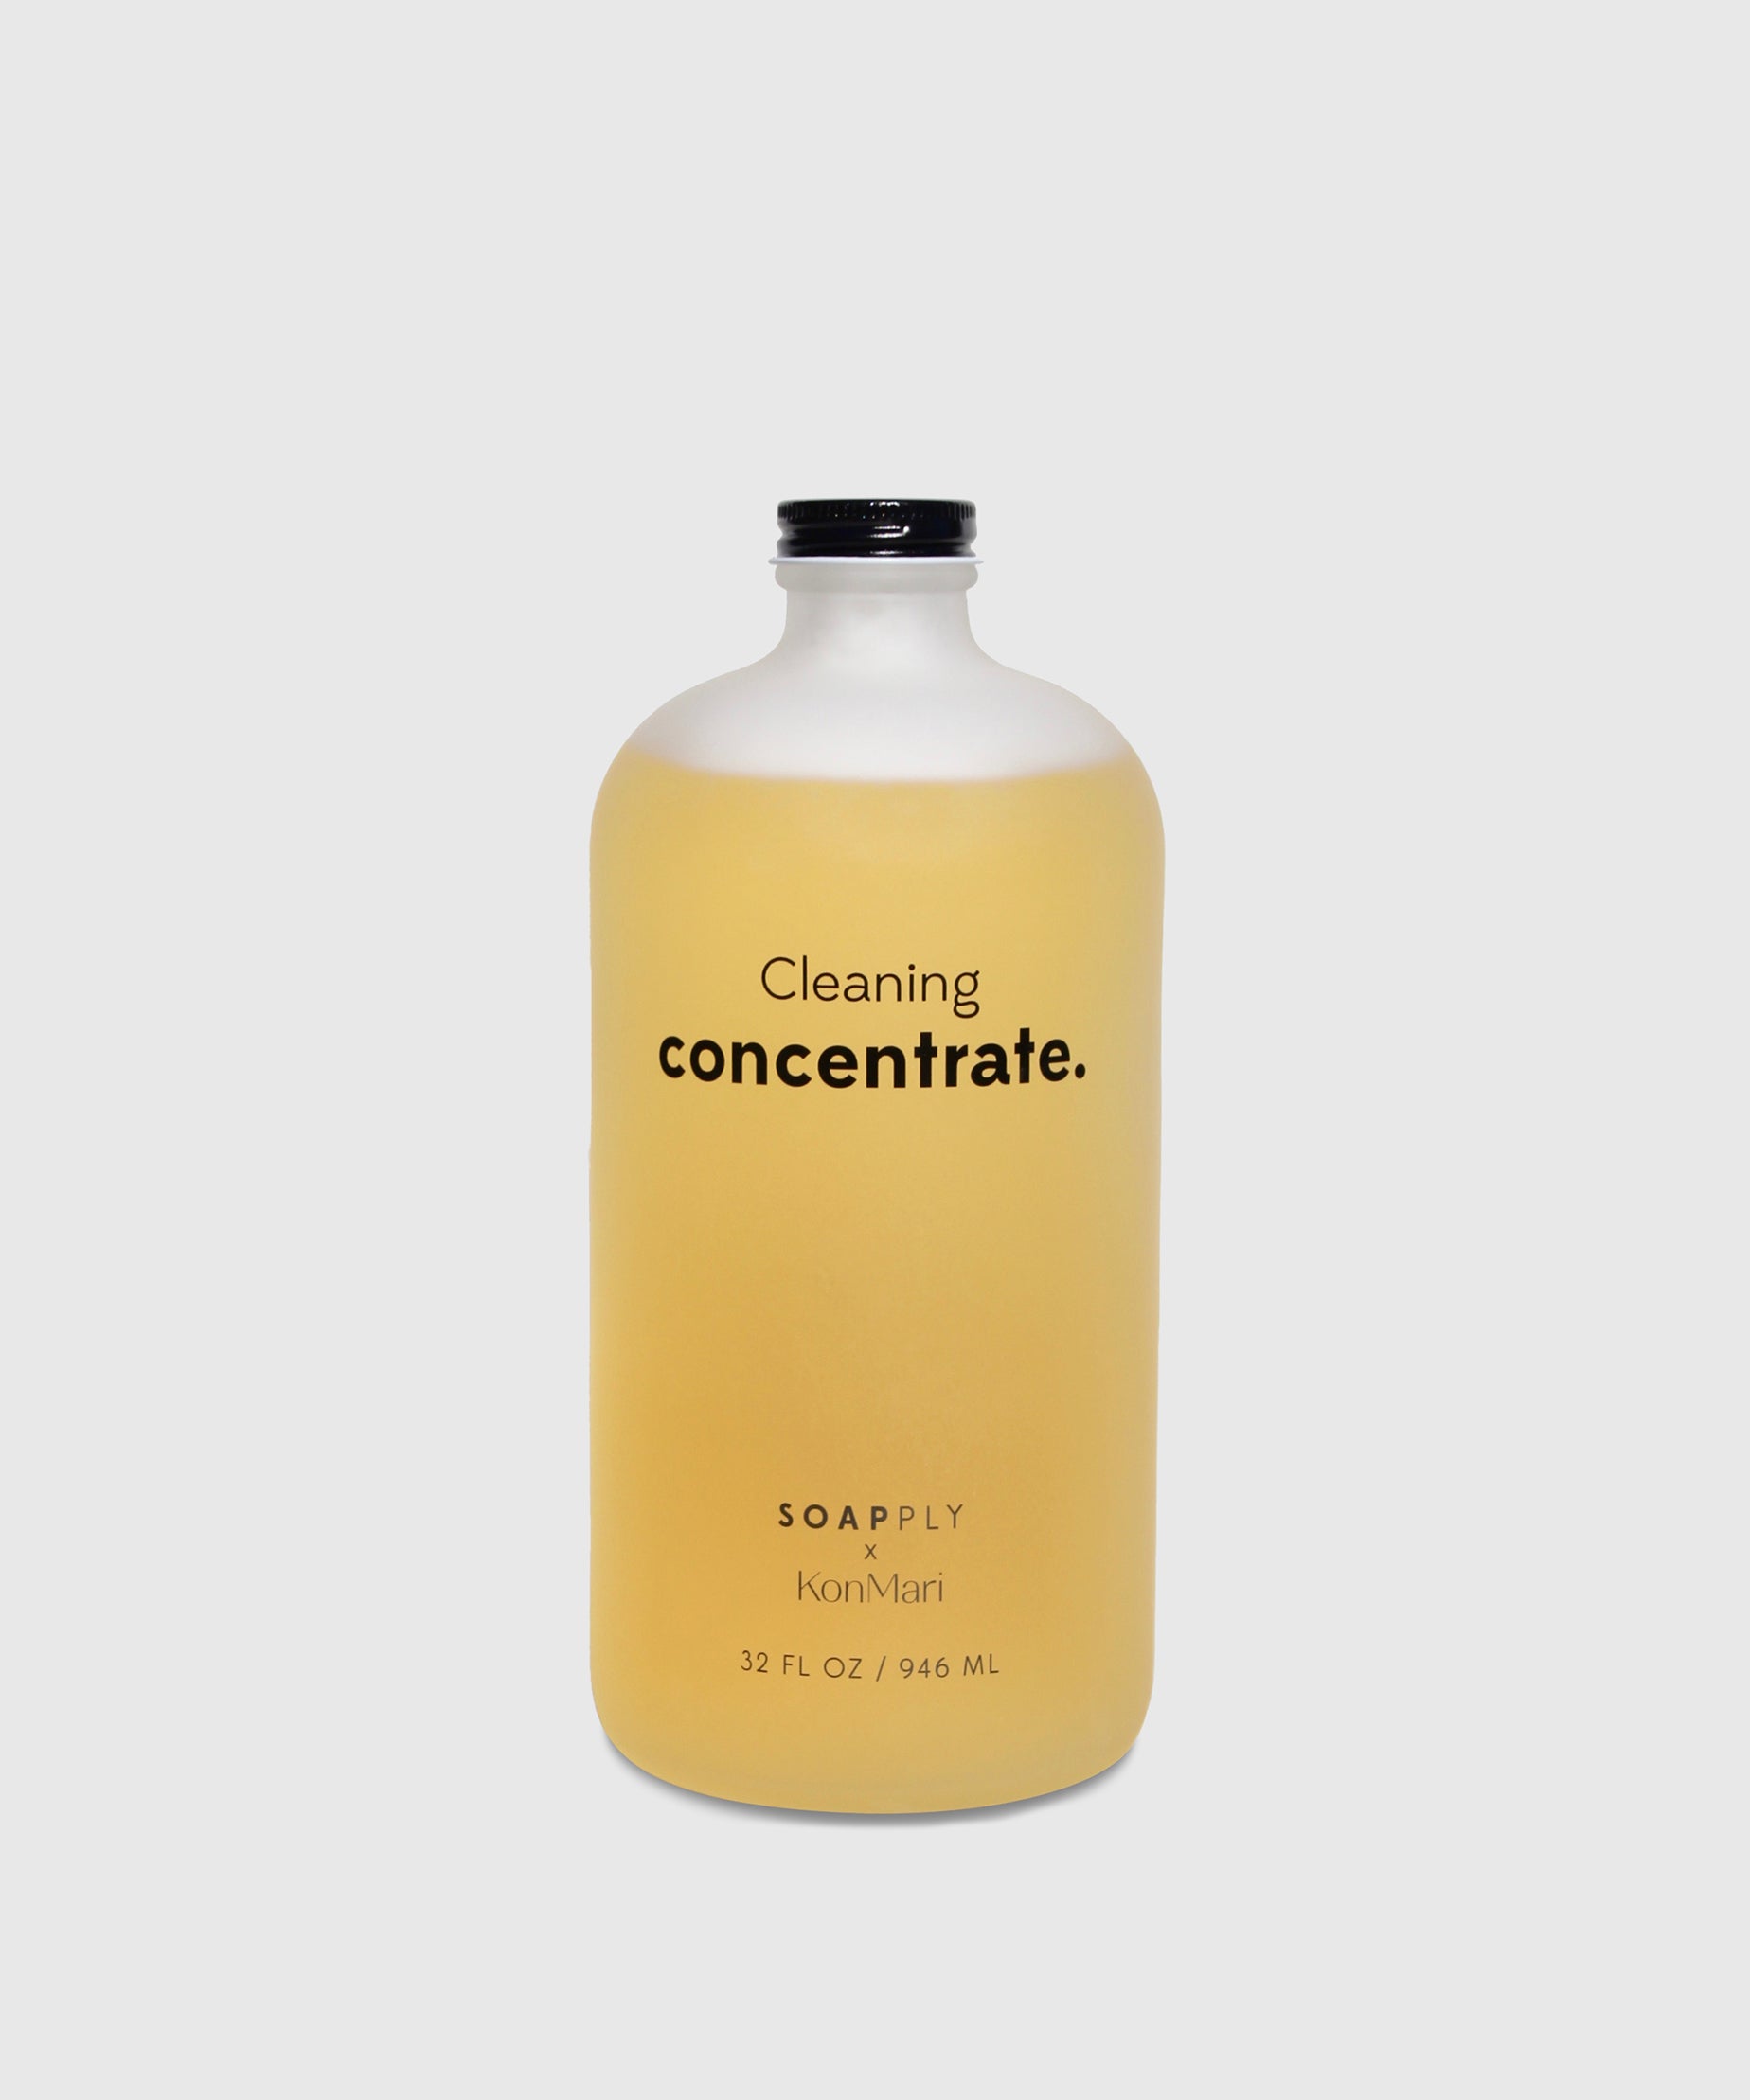 Mindful Home Cleaning Concentrate | Soapply x KonMari by Marie Kondo 